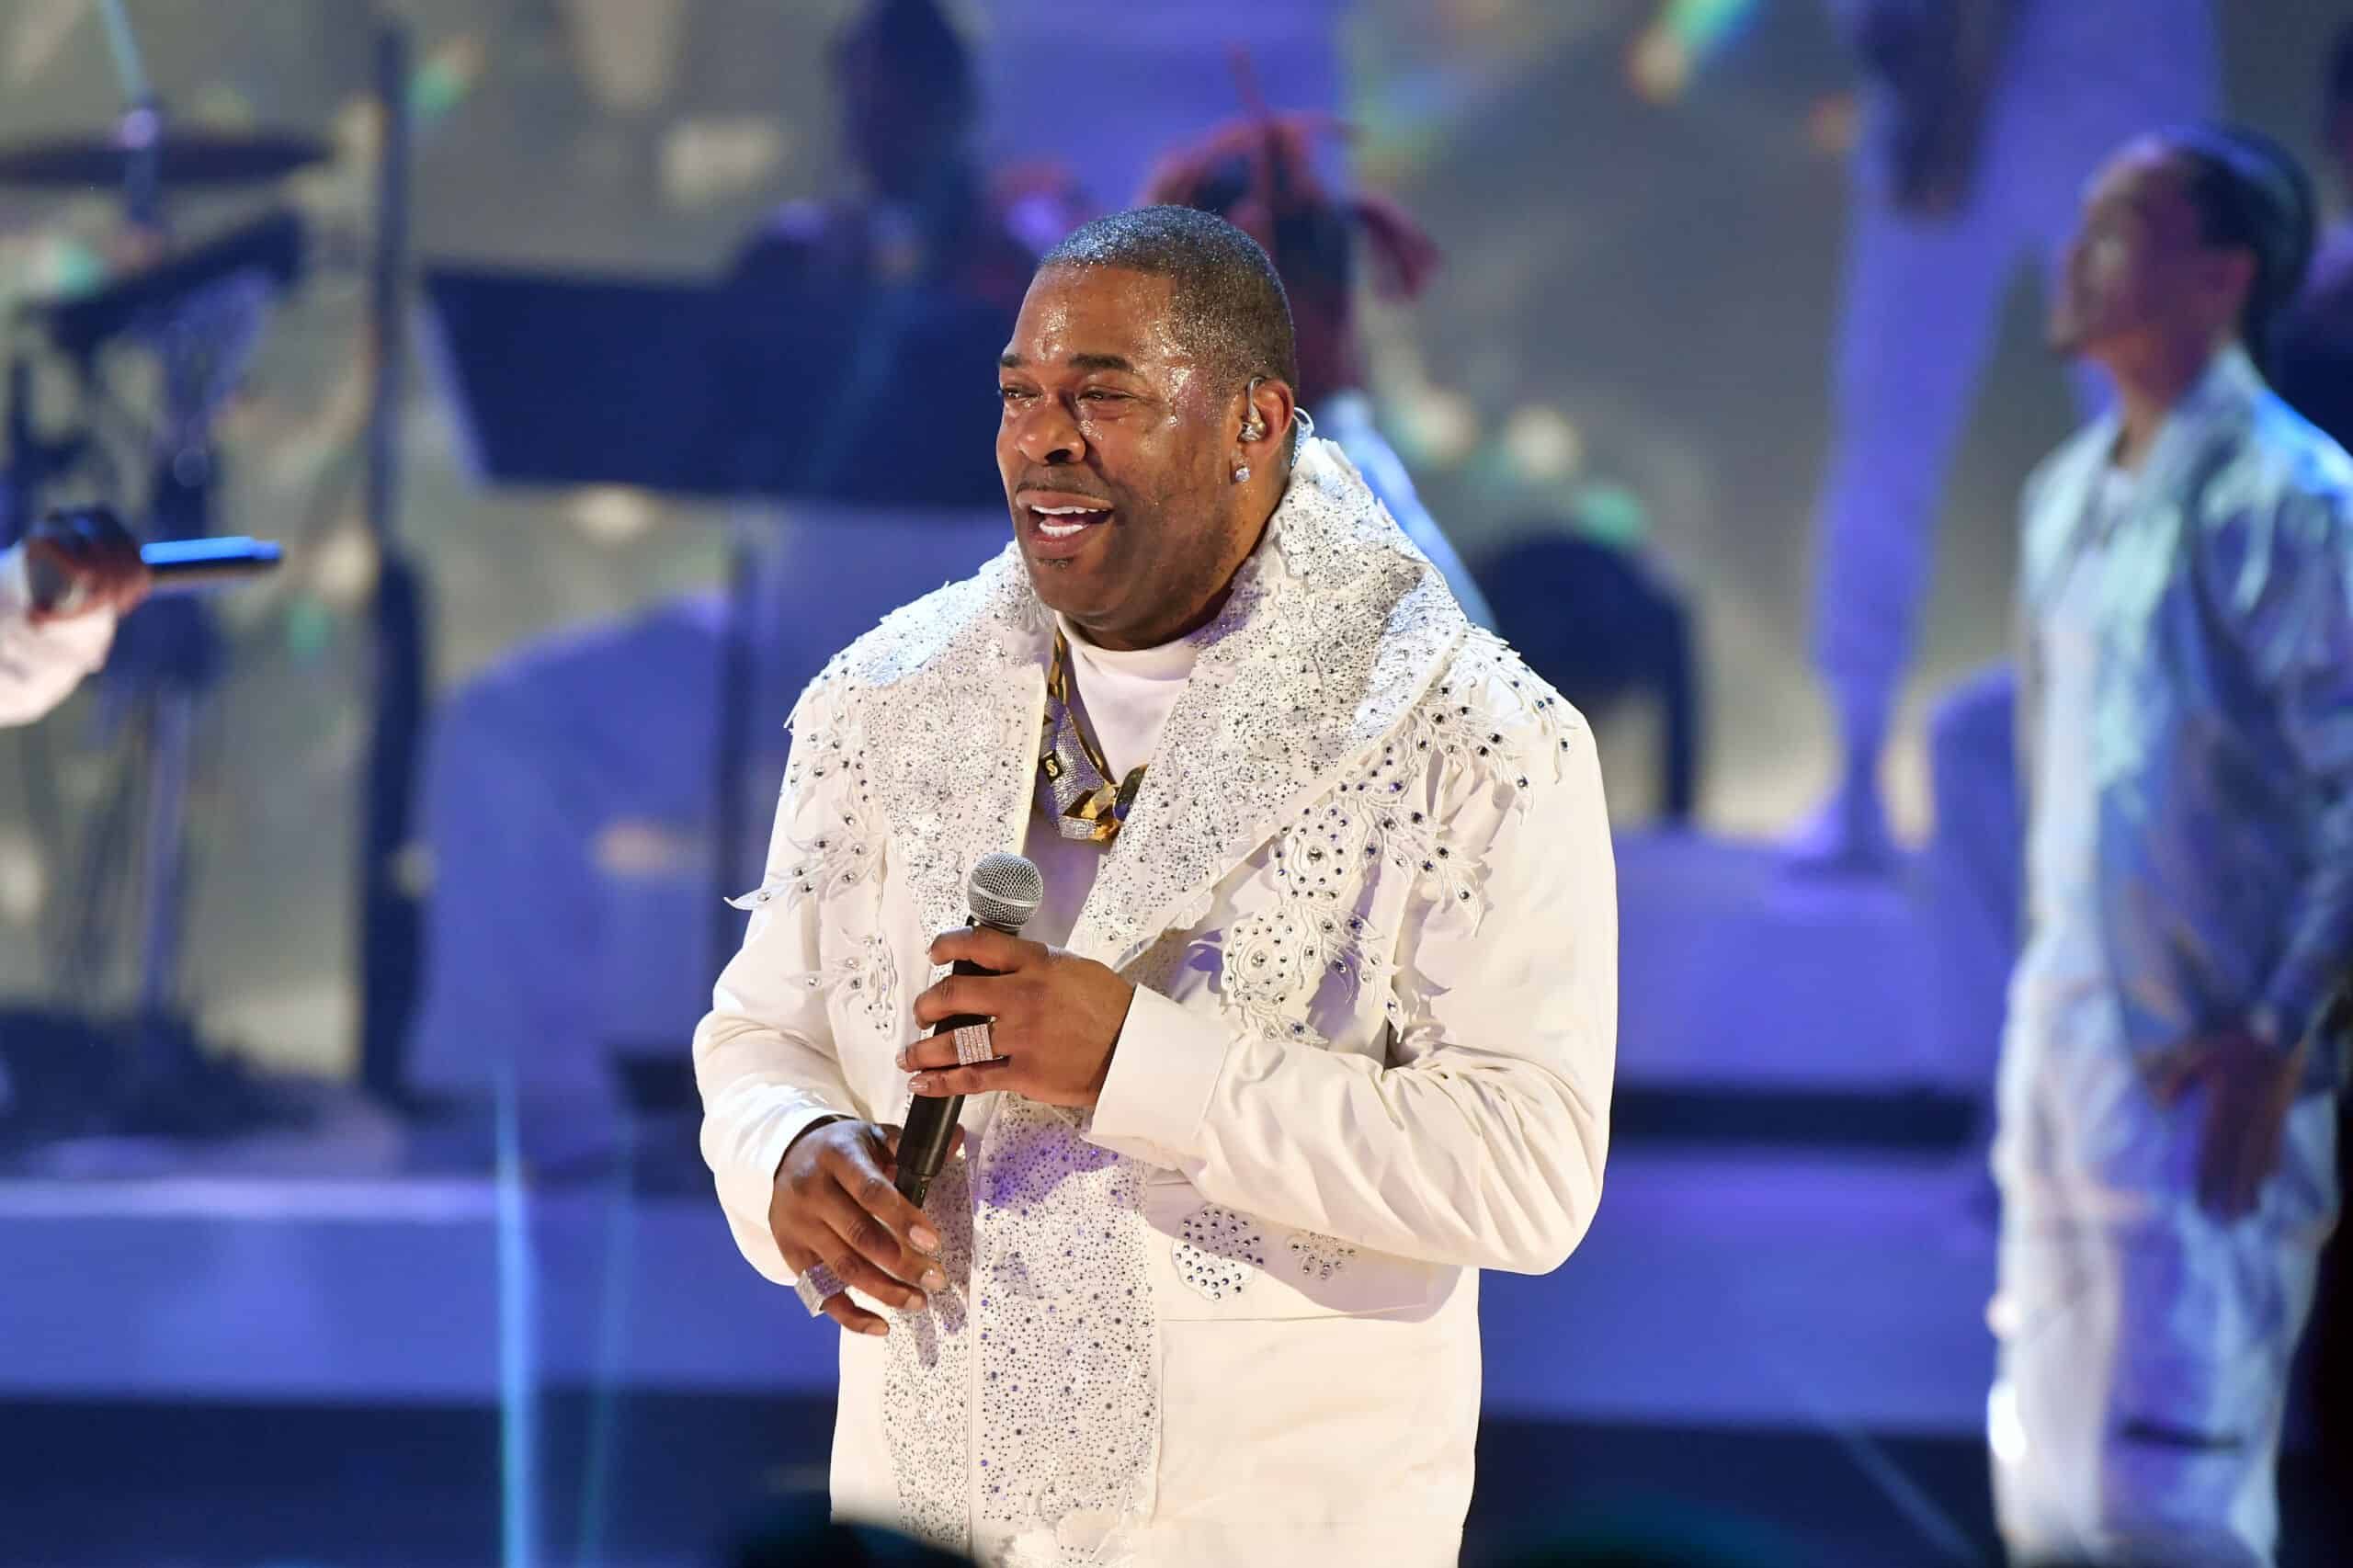 Busta Rhymes Performs On The 'Tonight Show' With His Children